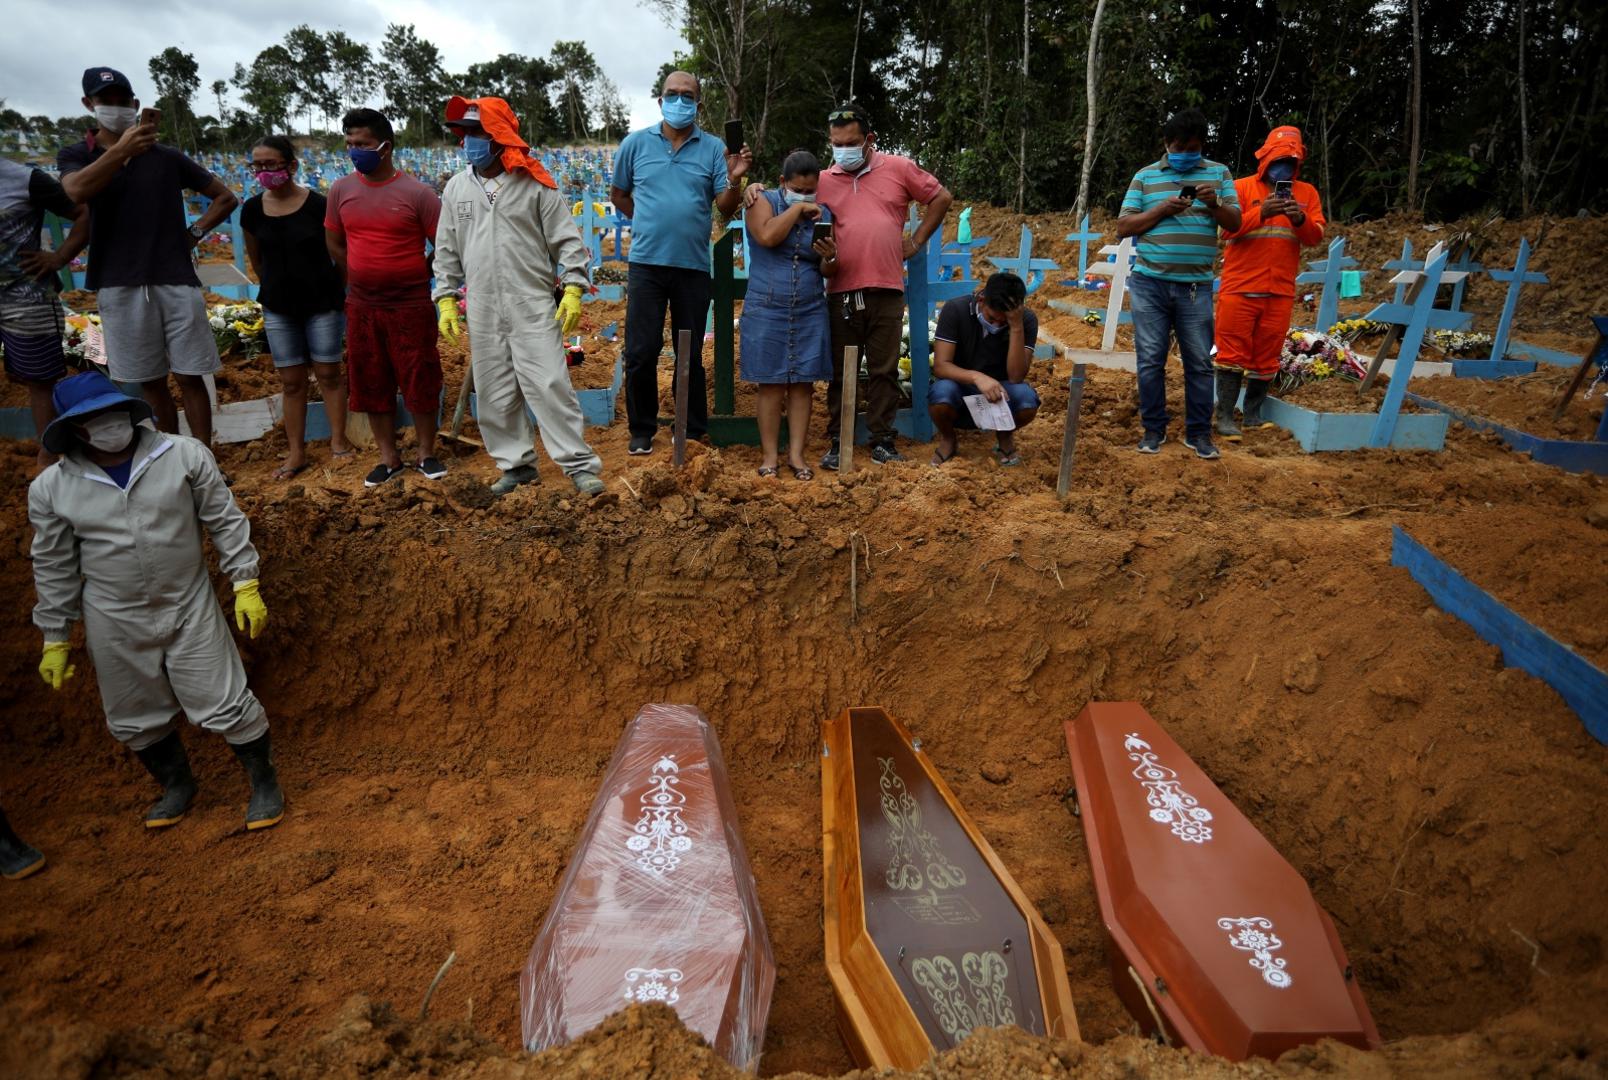 Outbreak of the coronavirus disease (COVID-19), in Manaus Relatives are seen during a mass burial of people who passed away due to the coronavirus disease (COVID-19), at the Parque Taruma cemetery in Manaus, Brazil, May 26, 2020. REUTERS/Bruno Kelly BRUNO KELLY